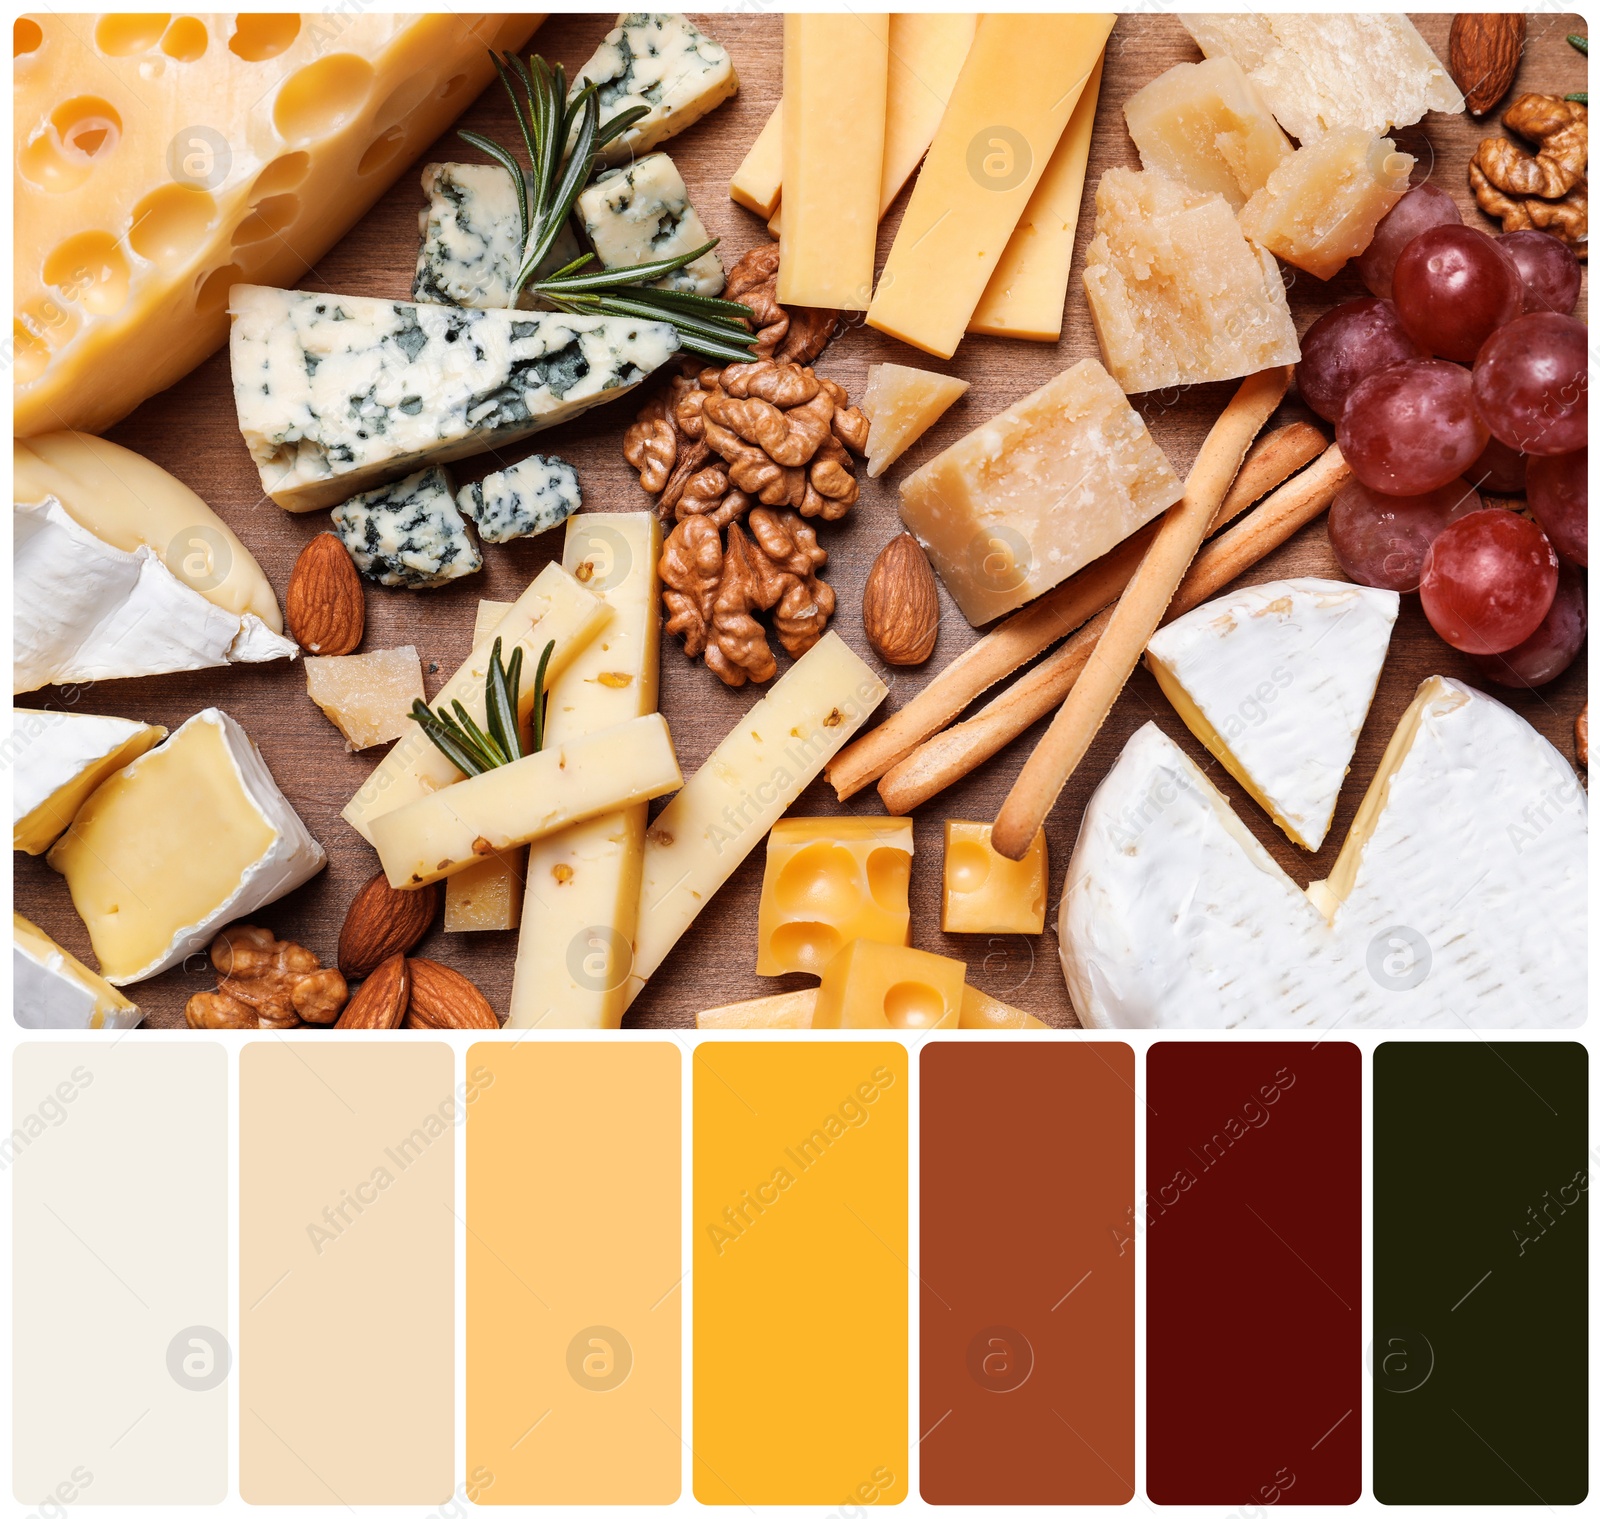 Image of Top view of cheese plate with grapes and nuts on wooden board and color palette. Collage